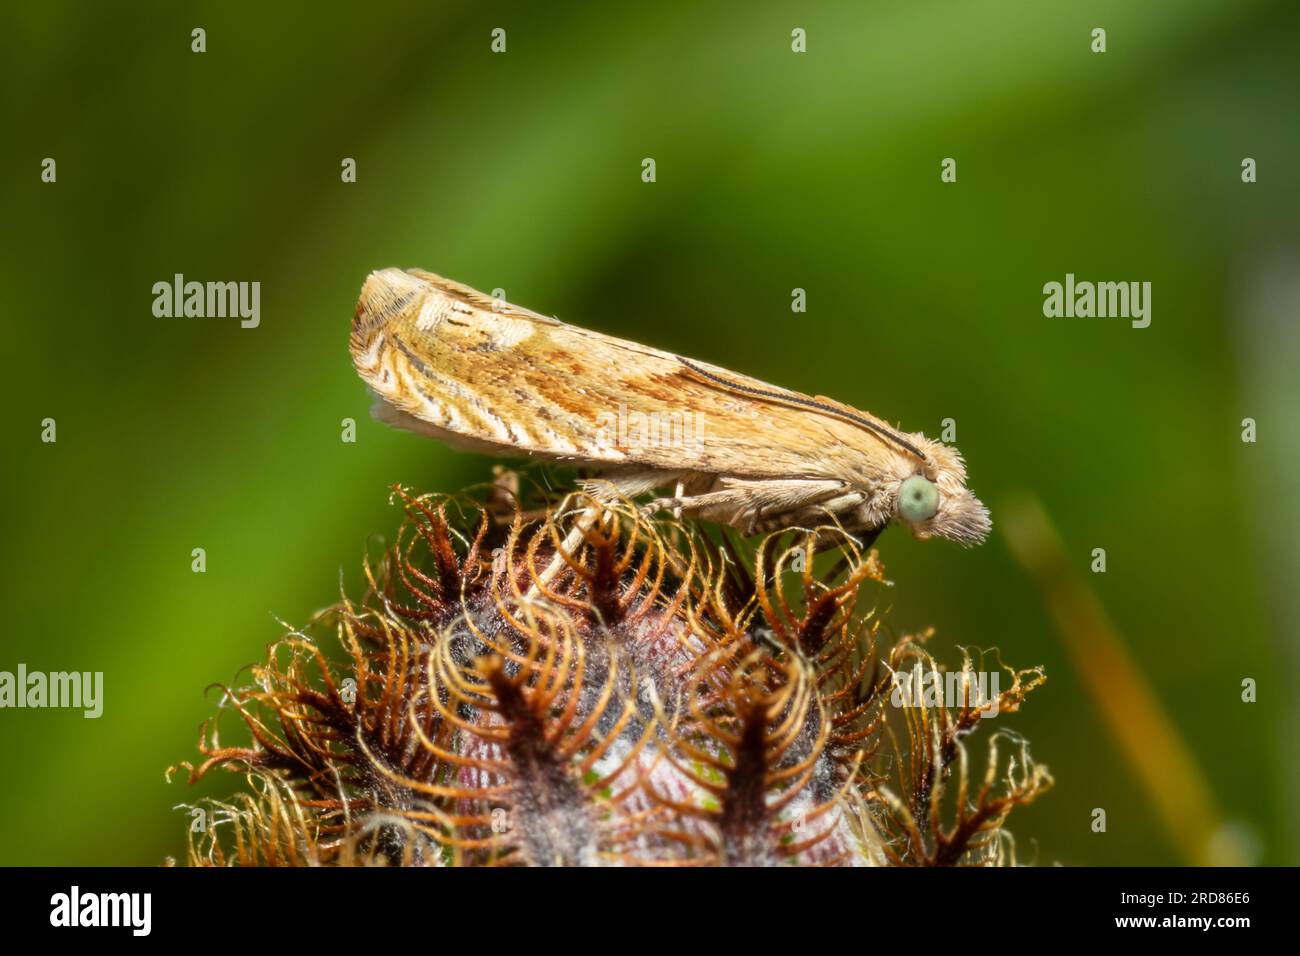 Eucosma cana, the Hoary Belle moth, resting on a flower head during daylight. Stock Photo